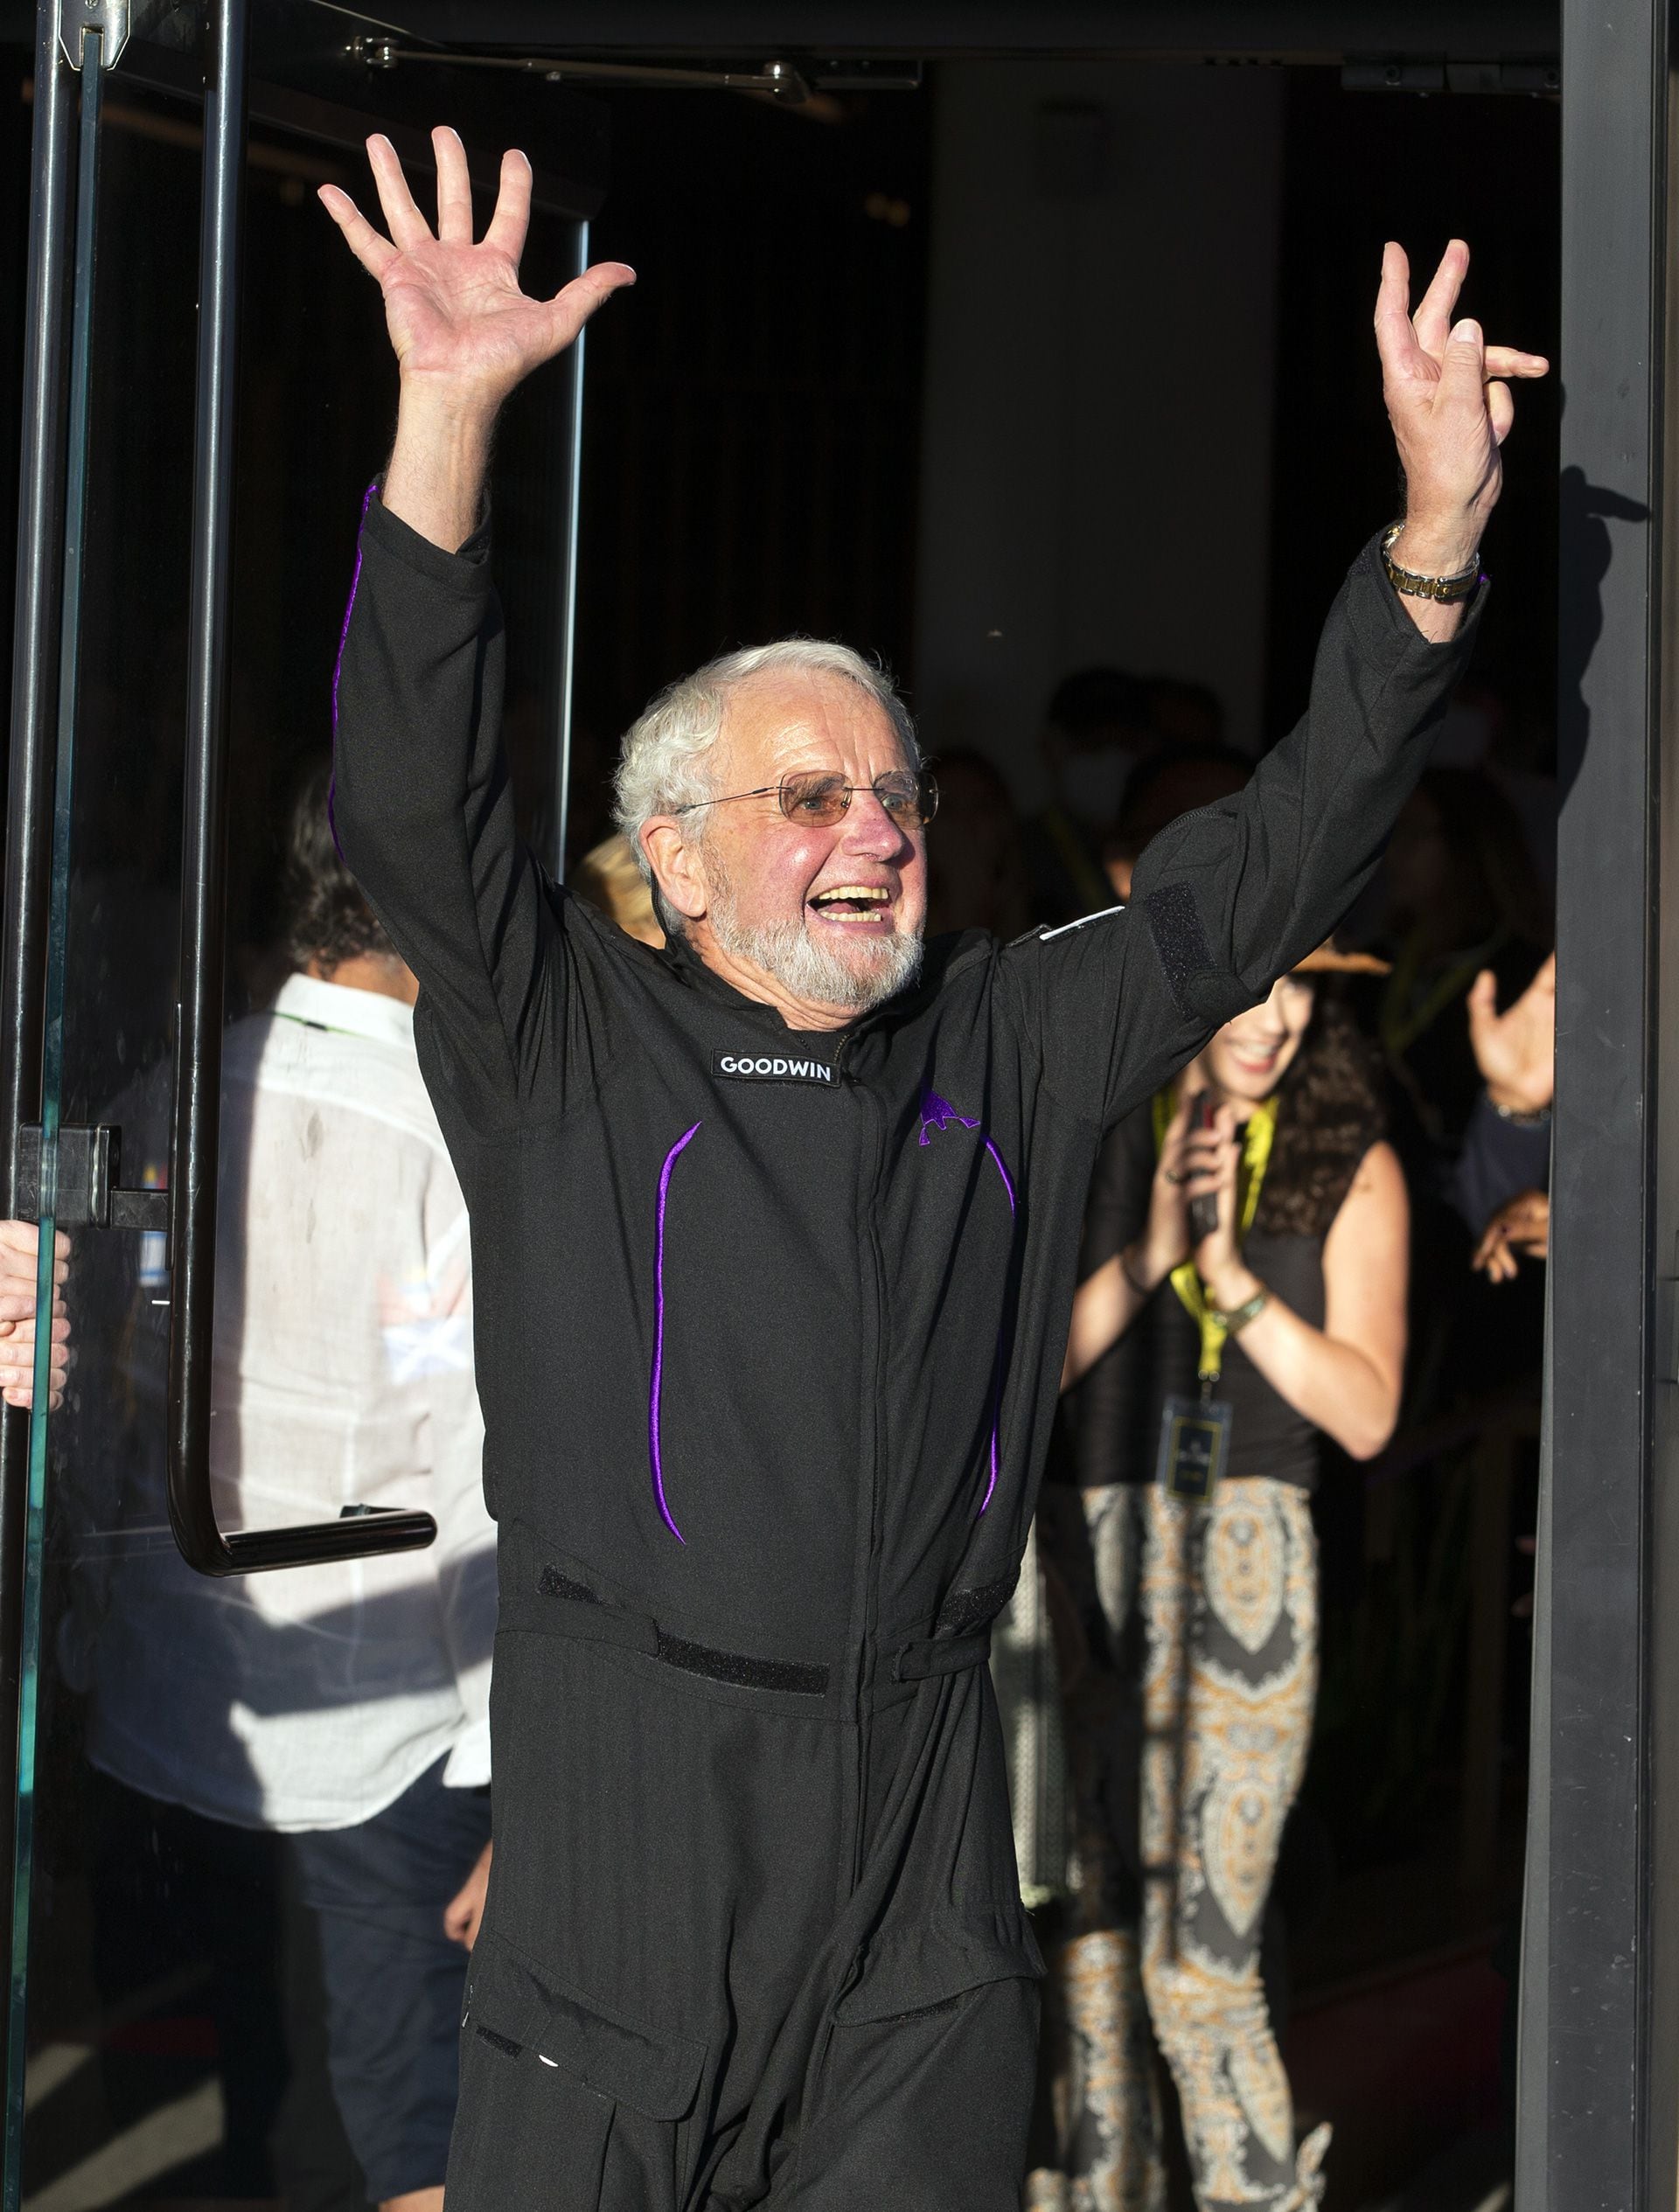 Space tourist Jon Goodwin, an 80-year-old British Olympian, waves to the crowd before boarding the Virgin Galactic flight at Spaceport America, near Truth or Consequences, N.M., Thursday, Aug. 10, 2023. Virgin Galactic is taking its first space tourists on a long-delayed rocket ship ride.  (AP Photo/Andrés Leighton)